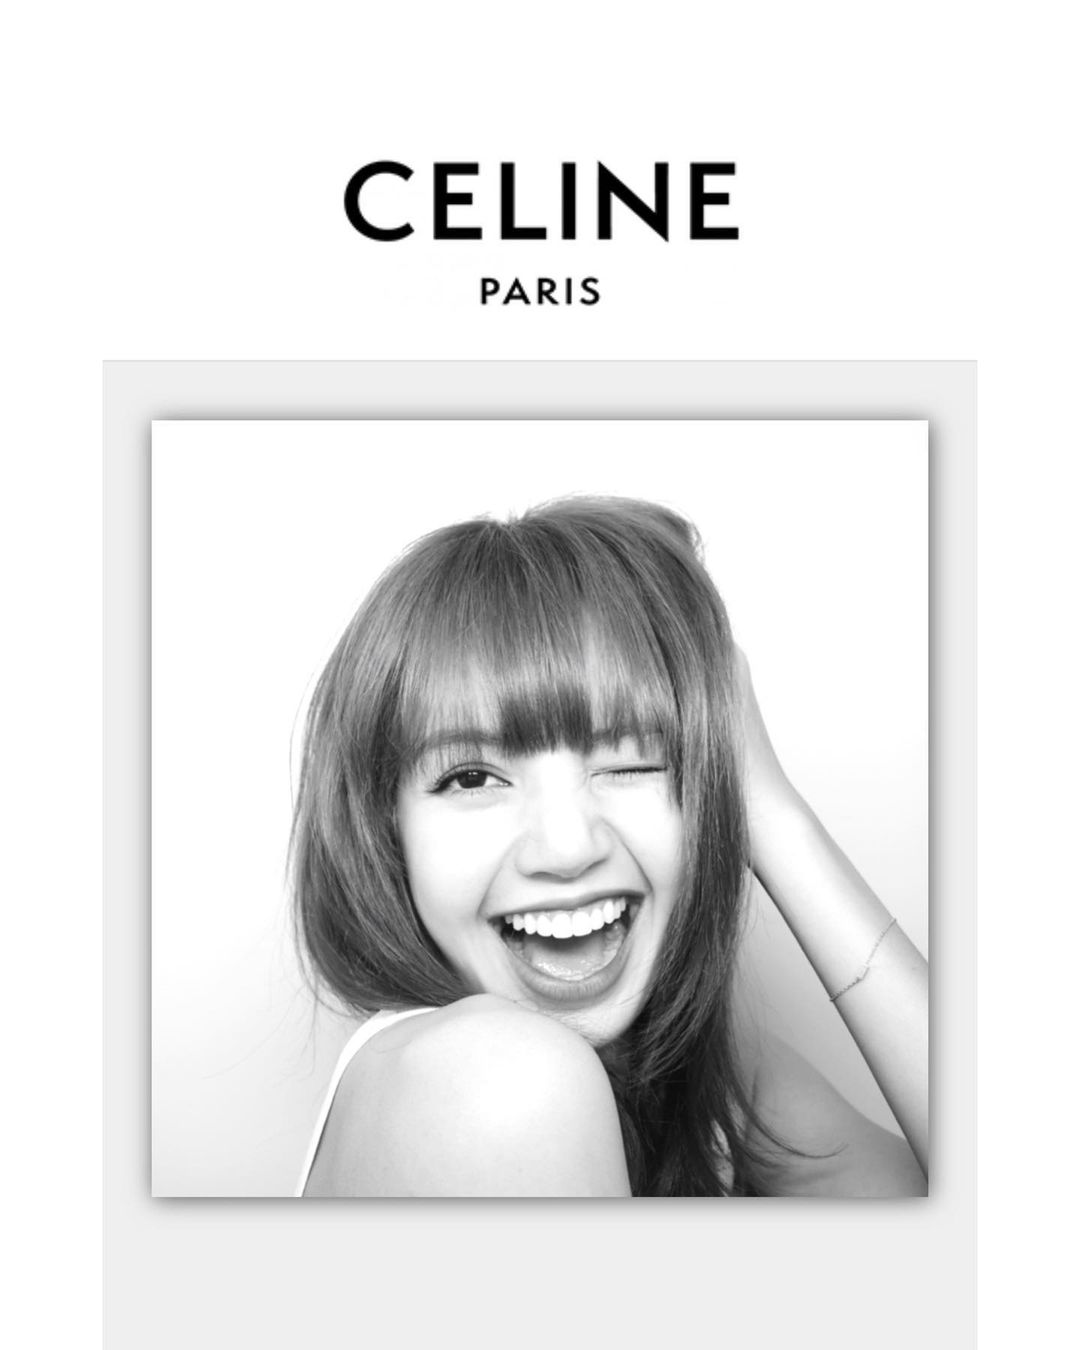 My favorite photo from @celine ‘s photo booth in Paris…